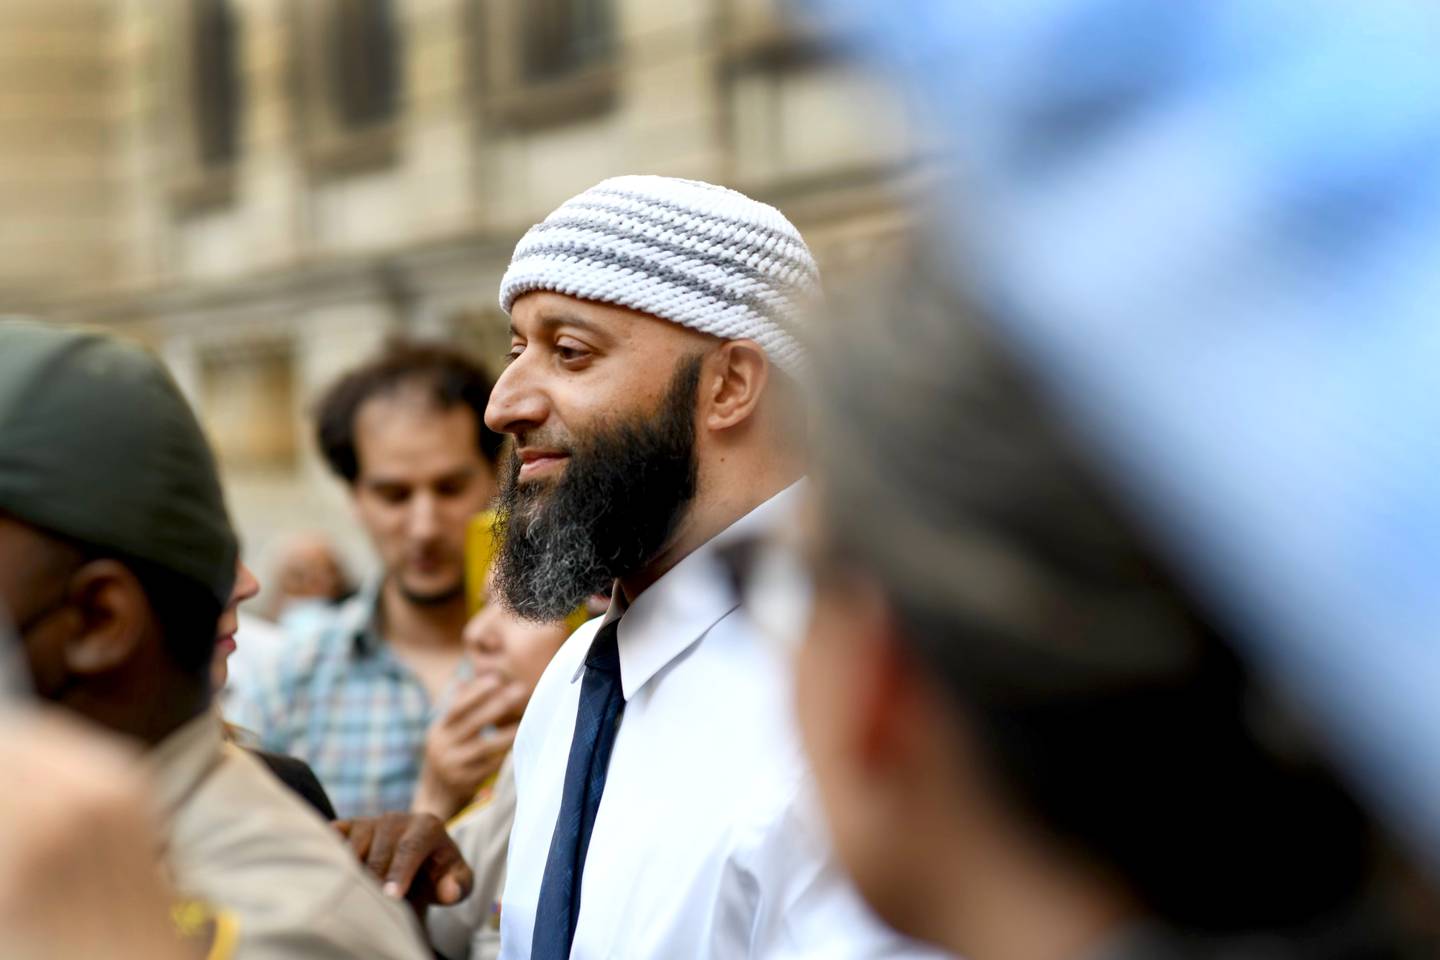 Baltimore judge Melissa Phinn threw out Adnan Syed's murder conviction in light of new evidence that someone else could have strangled Hae Min Lee, ordered the release of  Syed.